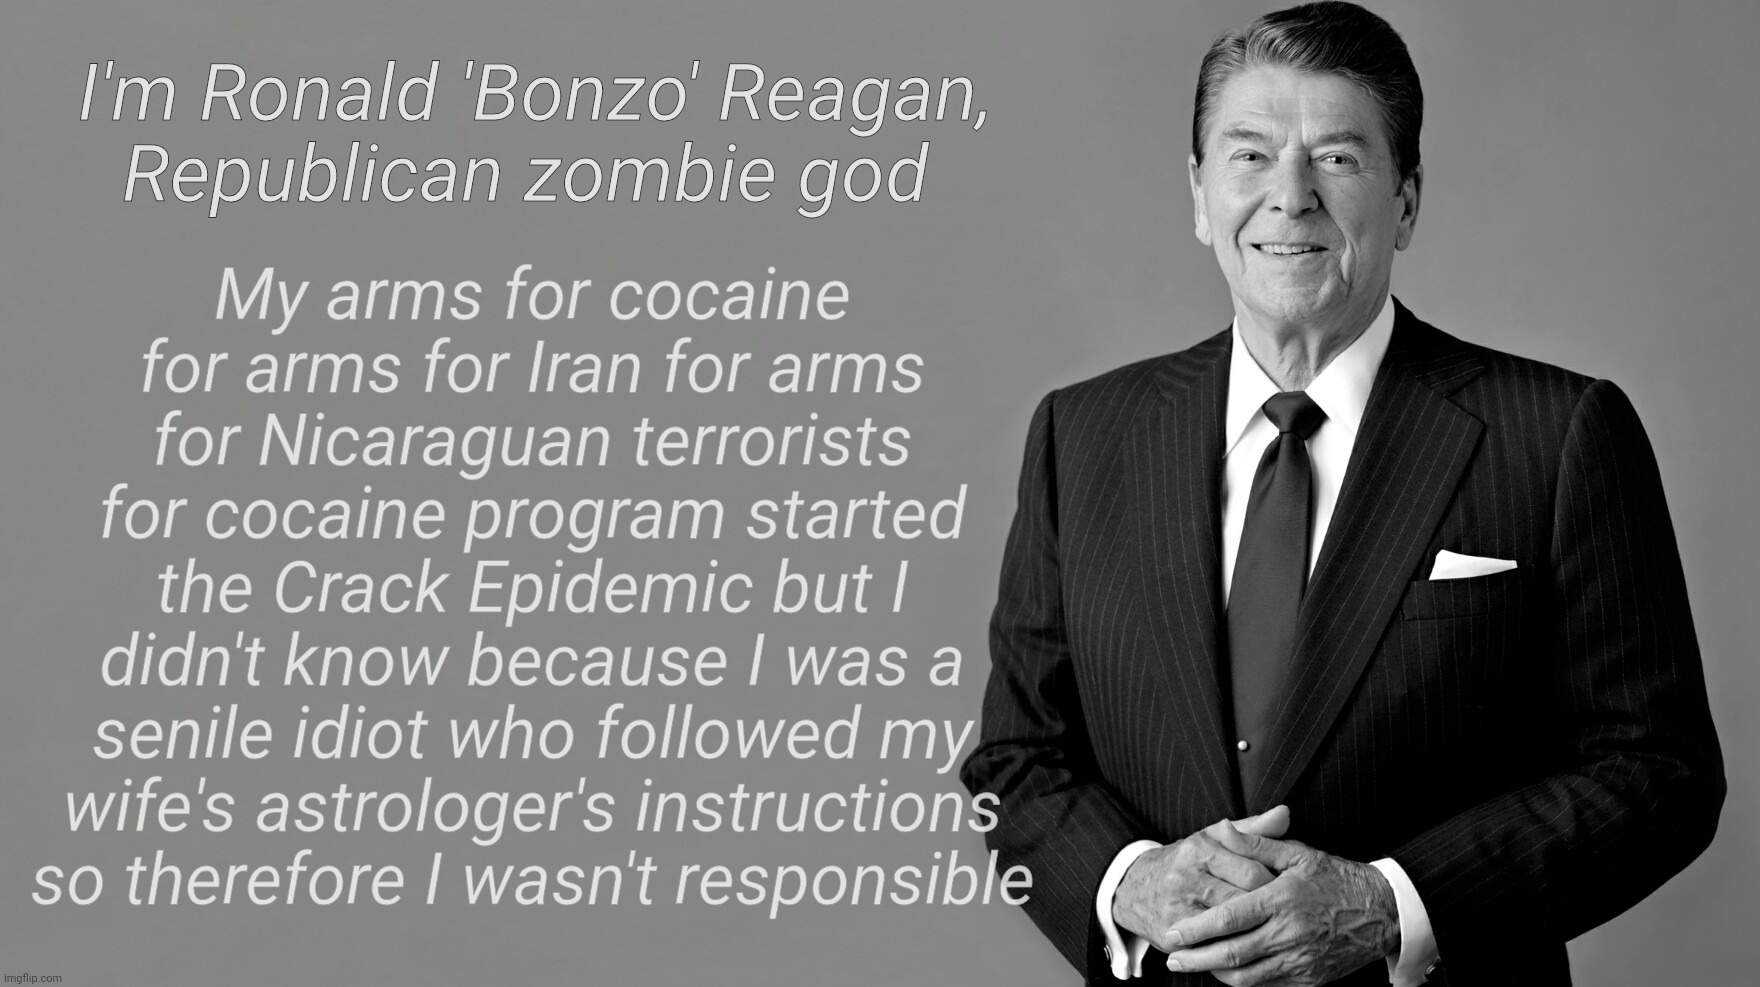 Biggest cocaine dealer in history,,, | I'm Ronald 'Bonzo' Reagan,
Republican zombie god My arms for cocaine for arms for Iran for arms for Nicaraguan terrorists for cocaine progra | image tagged in ronald reagan,biggest coke dealer in history,arms for hostages,hostages for cocaine,cocaine for arms,and repeat | made w/ Imgflip meme maker